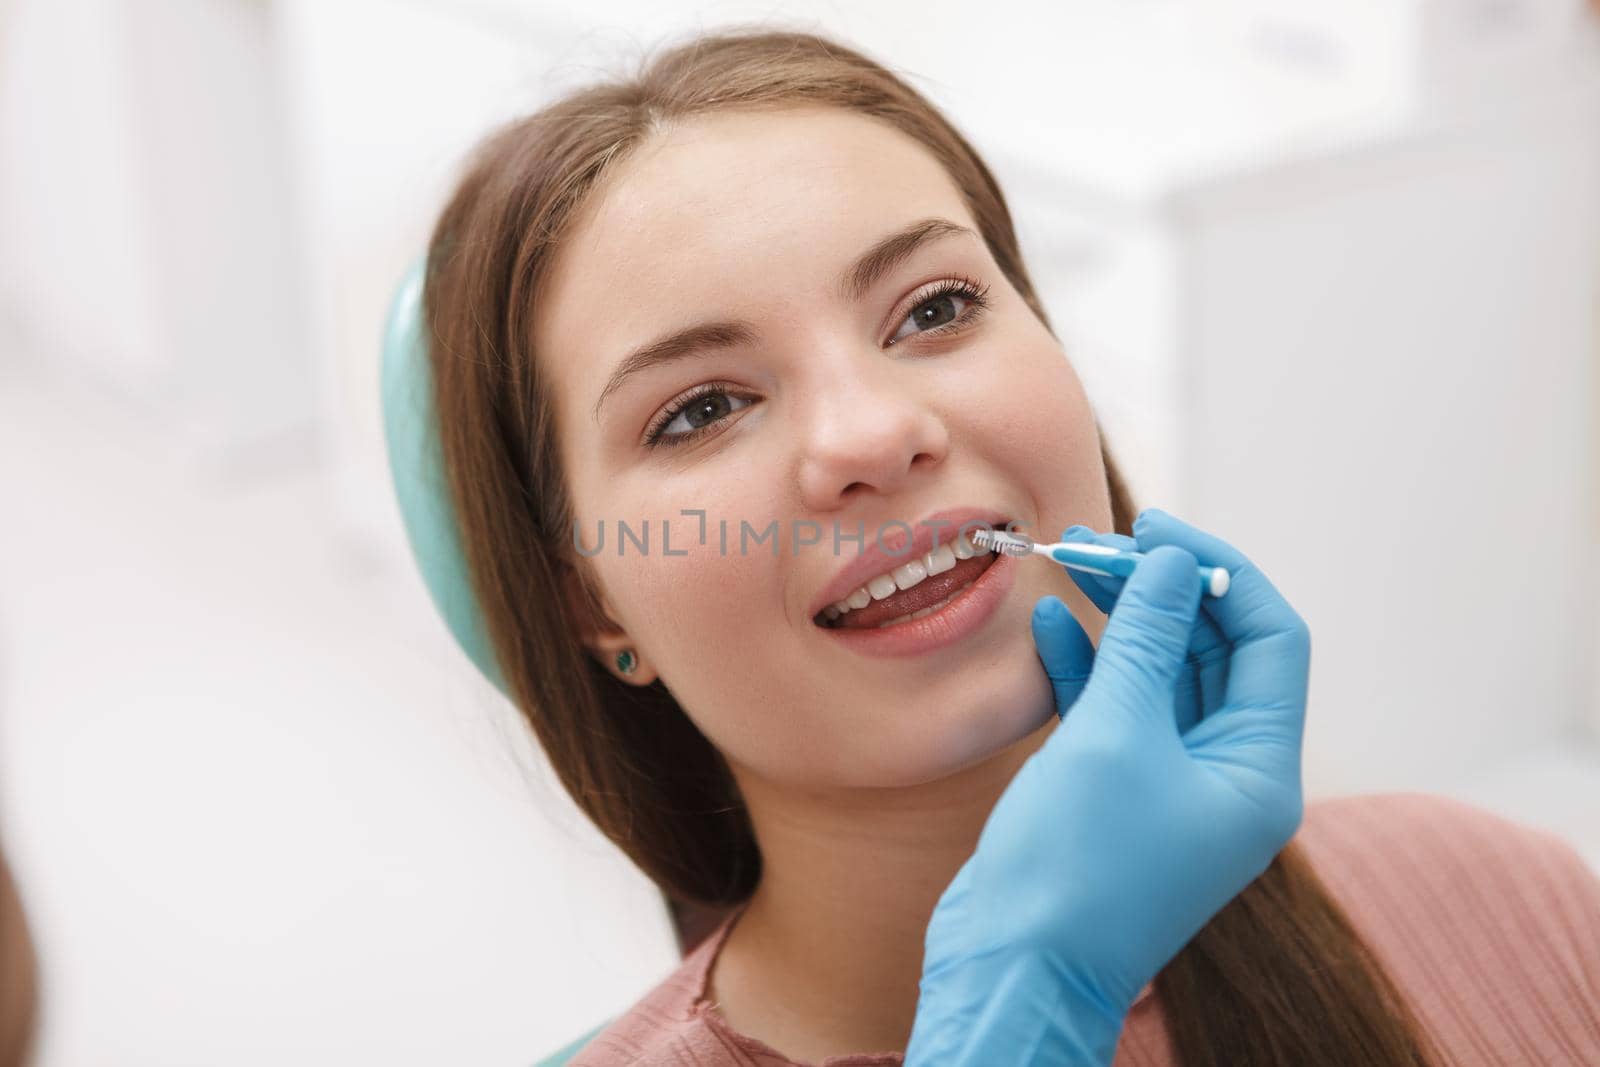 Female patient at dental clinic by MAD_Production